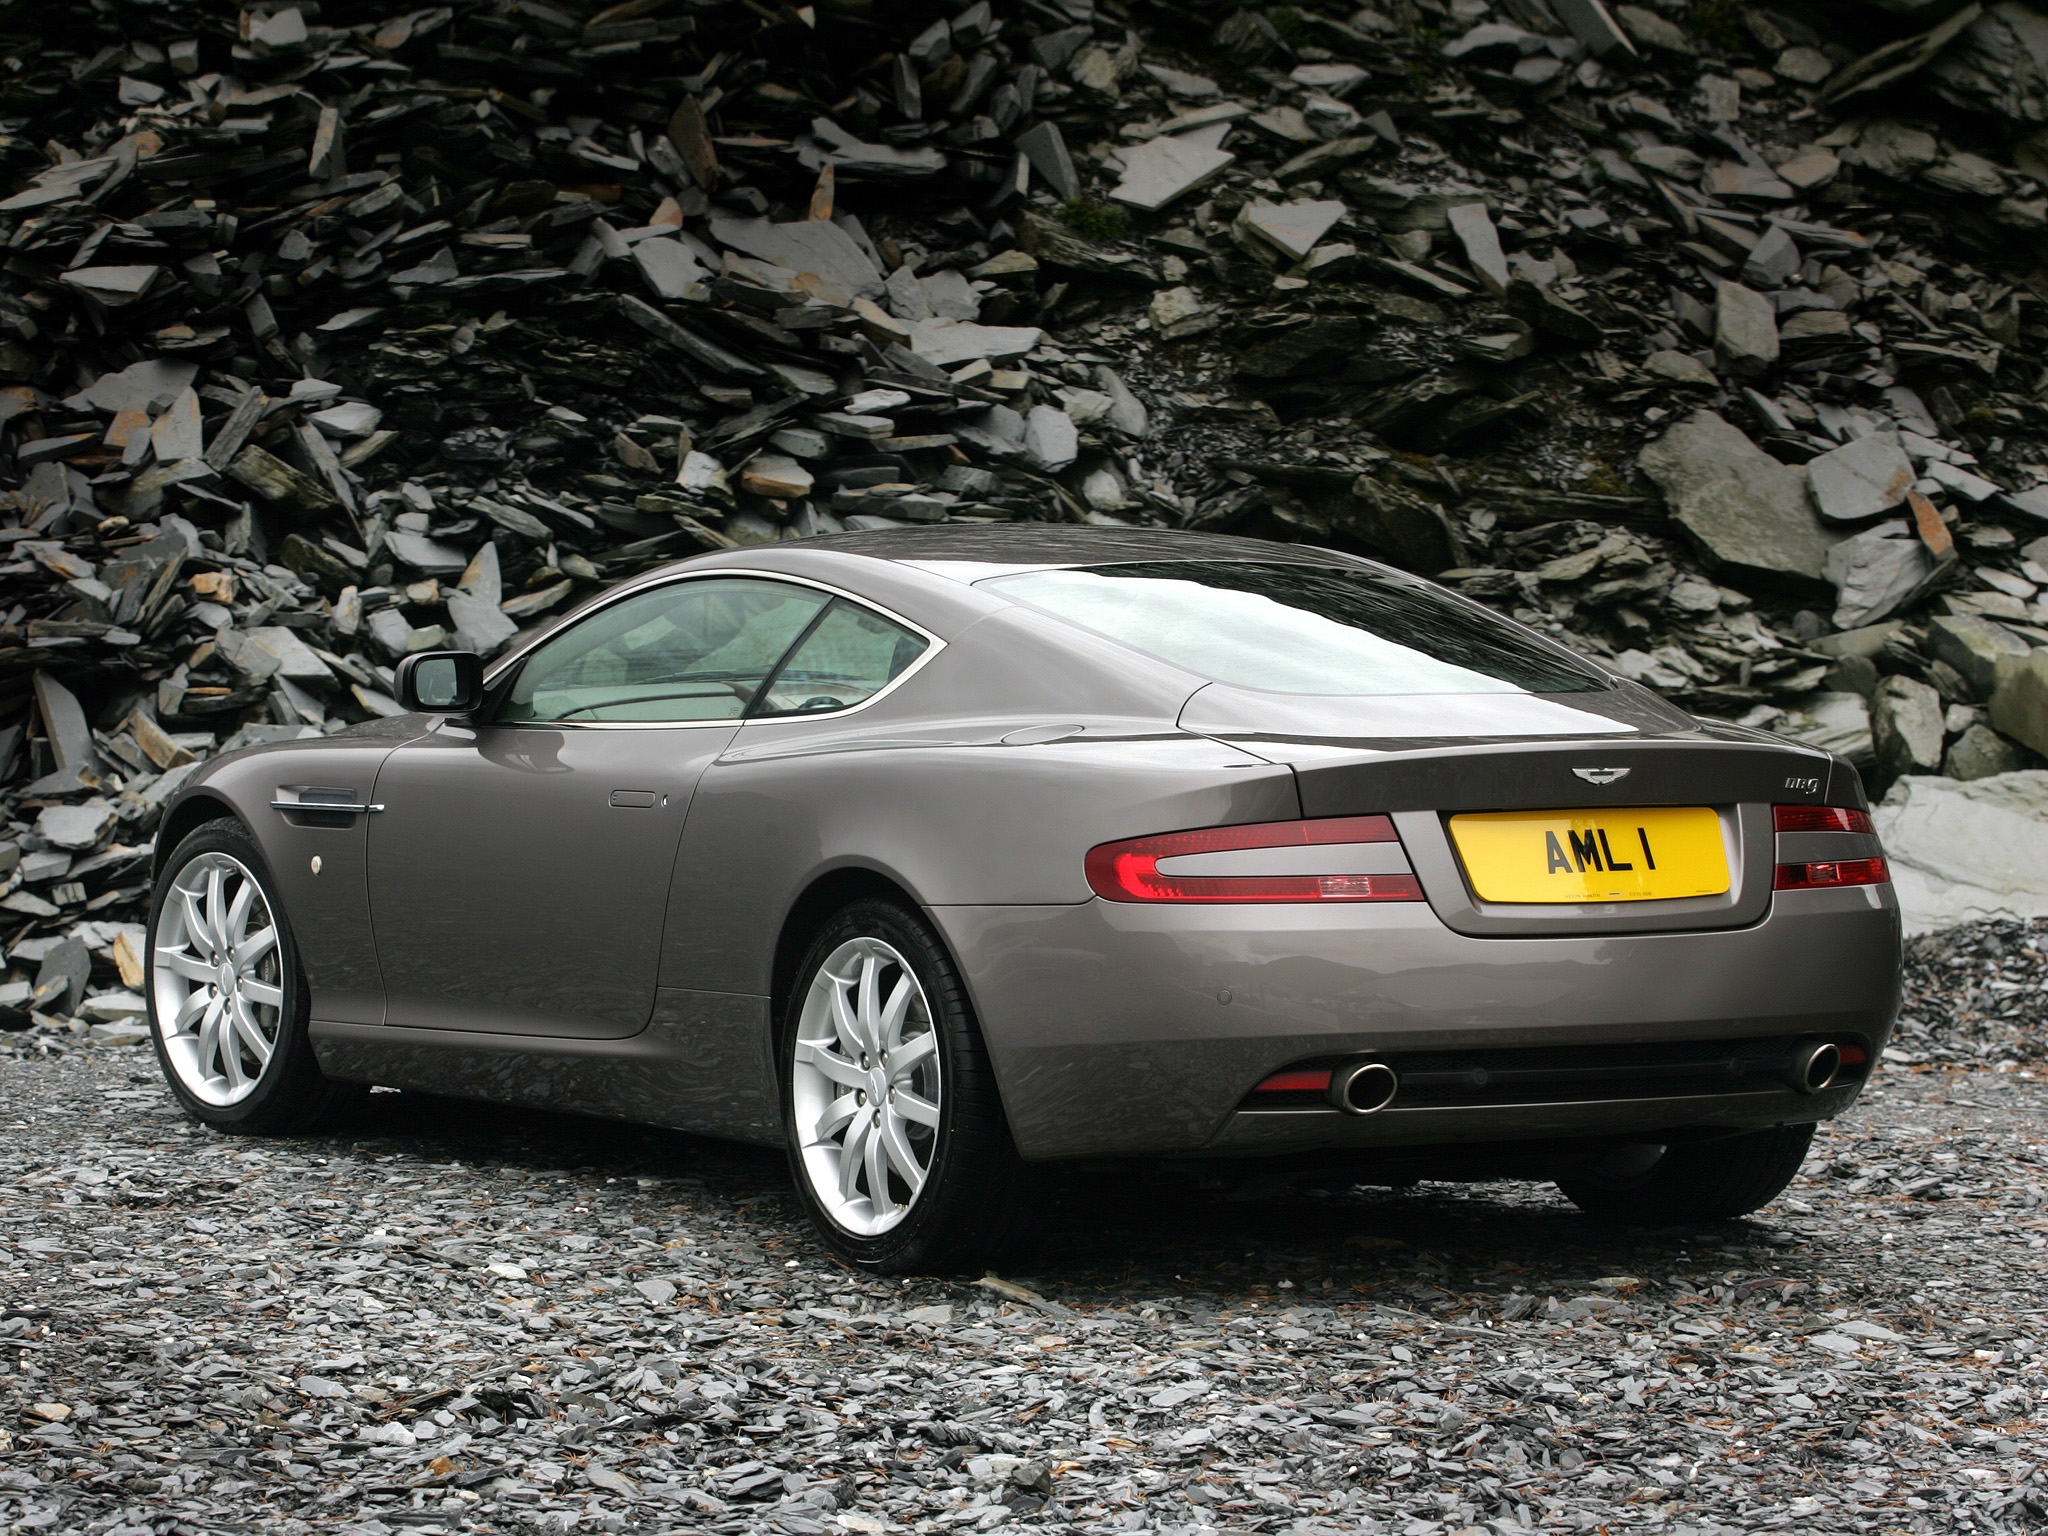 cars, auto, aston martin, grey, back view, rear view, style, 2004, db9 Image for desktop